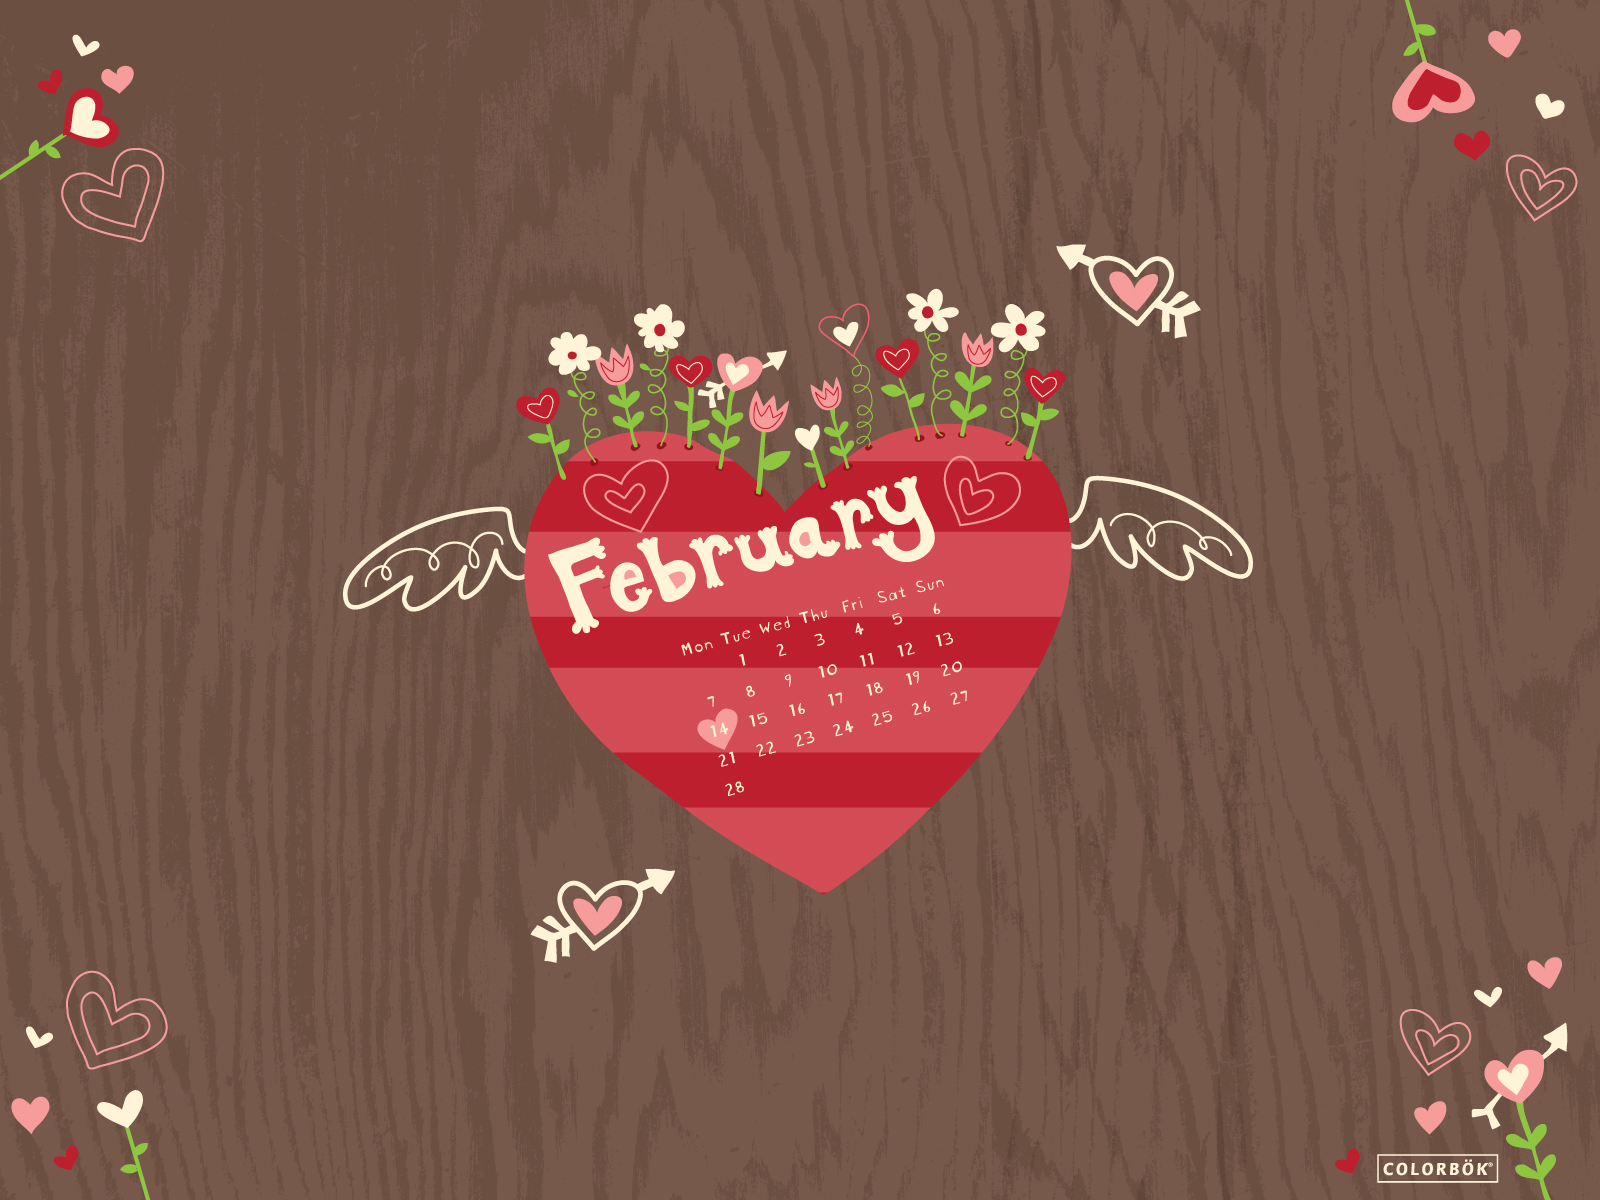 February Wallpapers Calendar 2013 Hd Wallpapers Backgrounds Photos